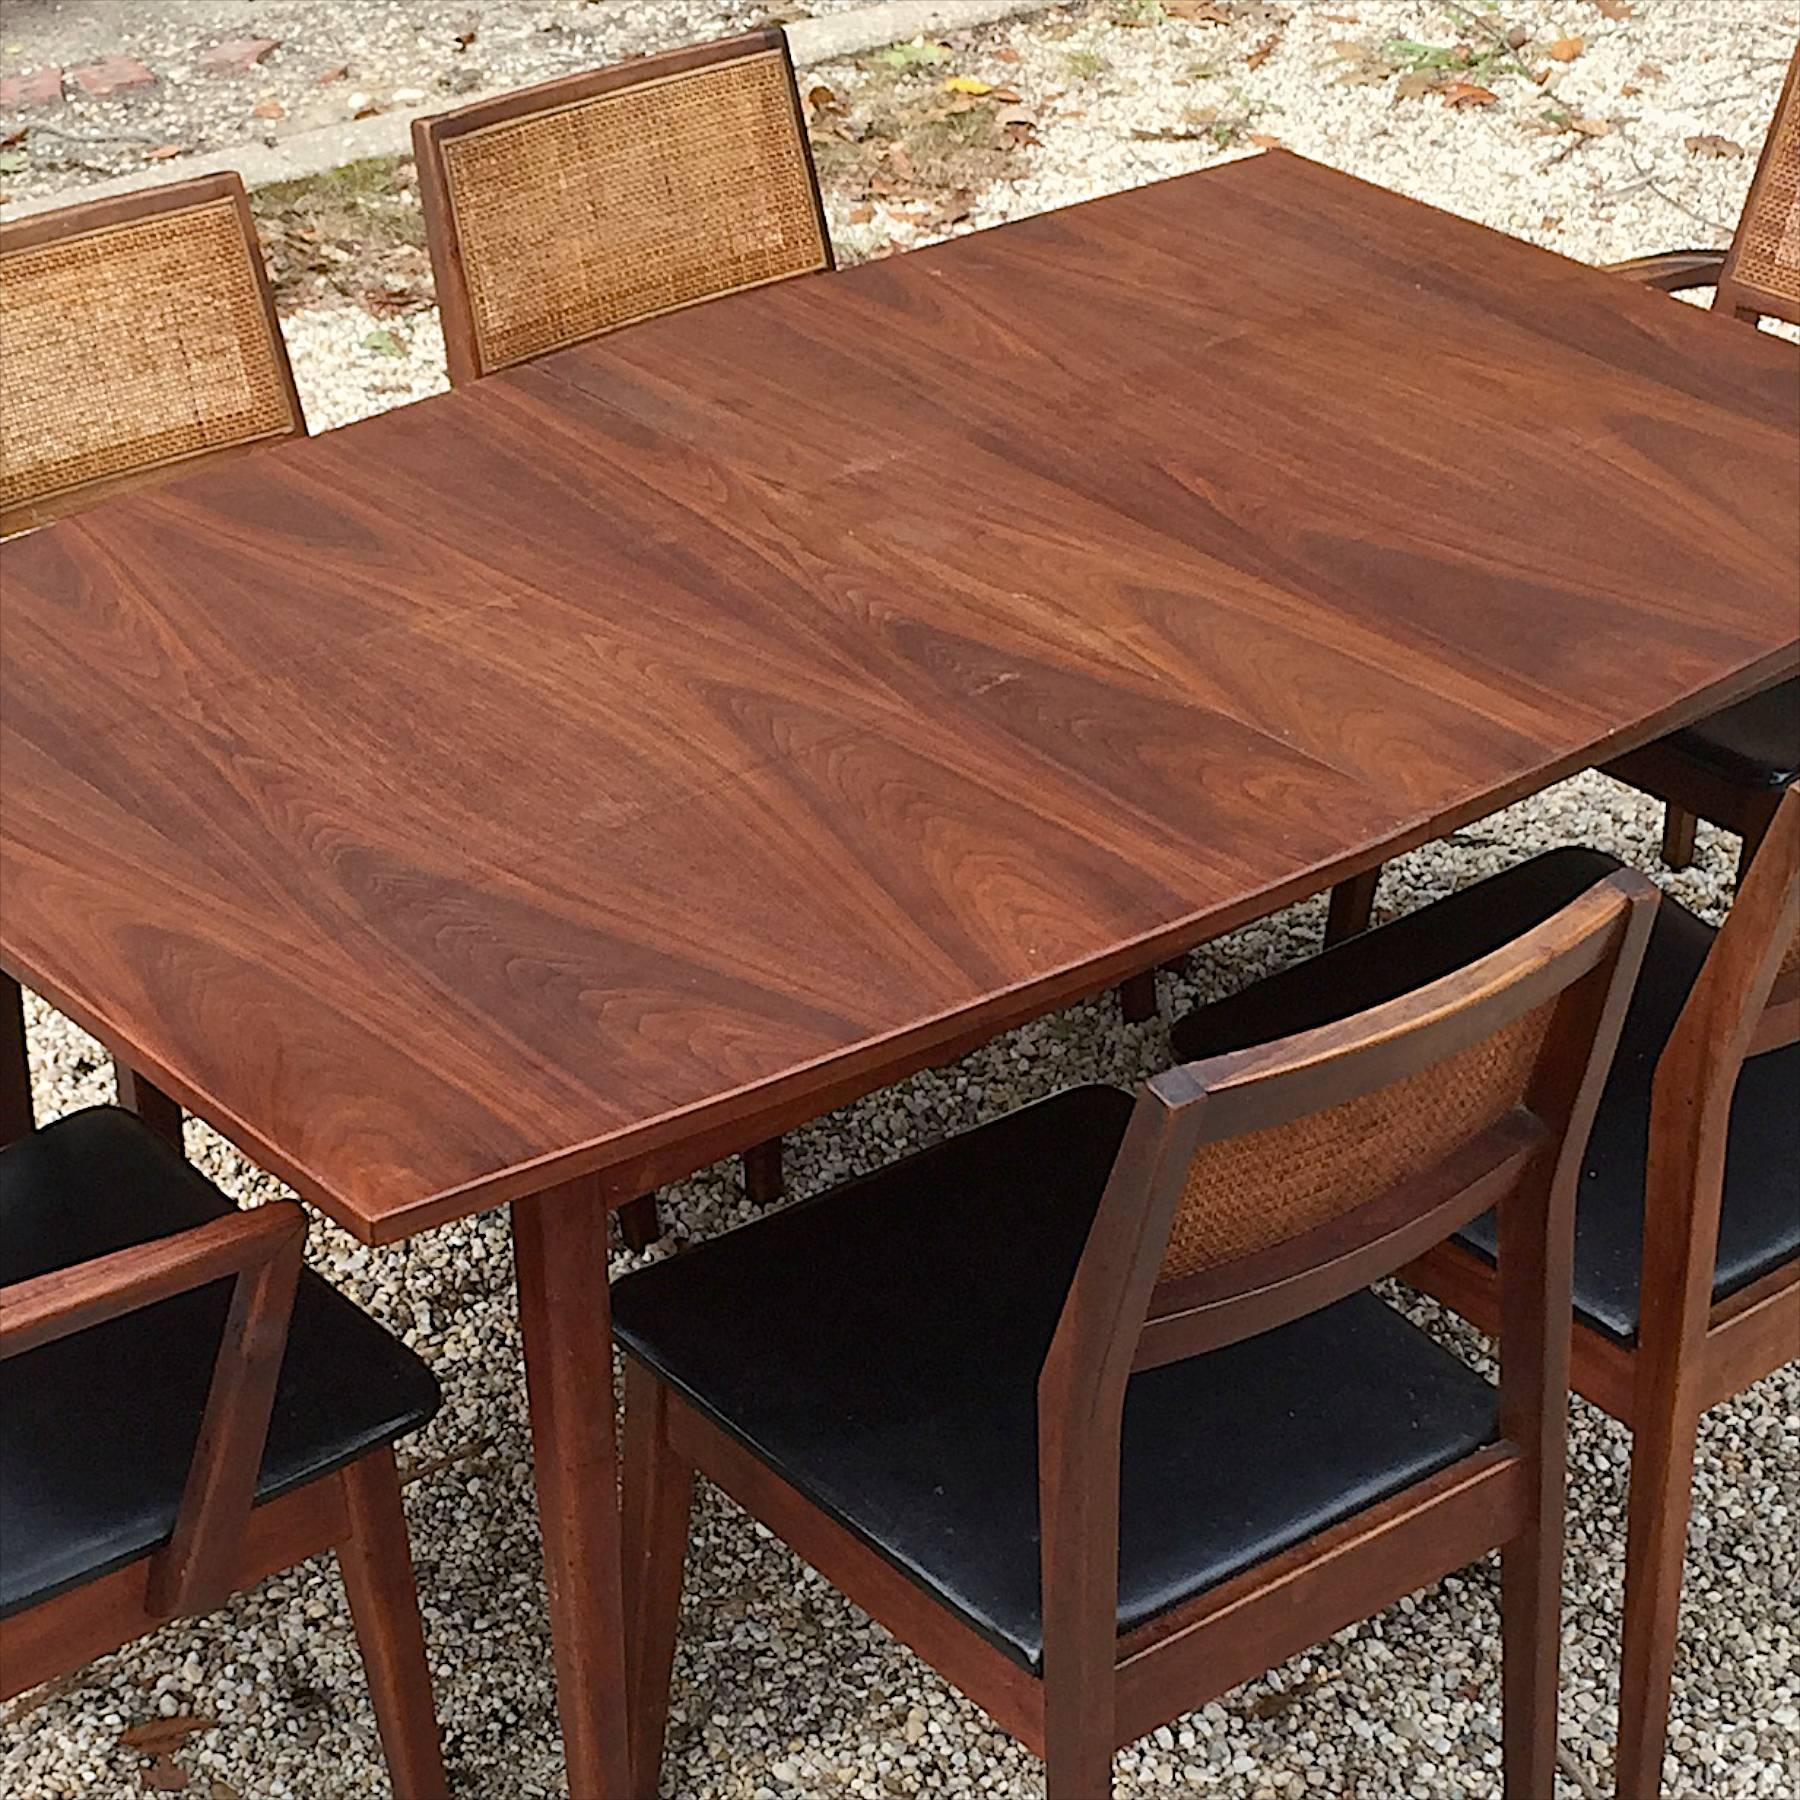 Estate fresh. Six chairs and table. Entire American modern old growth walnut dining set included, no leaves with table but have protective pads. Solid walnut armchairs and side chairs with cane/wicker/rattan backrests.

Good vintage condition,